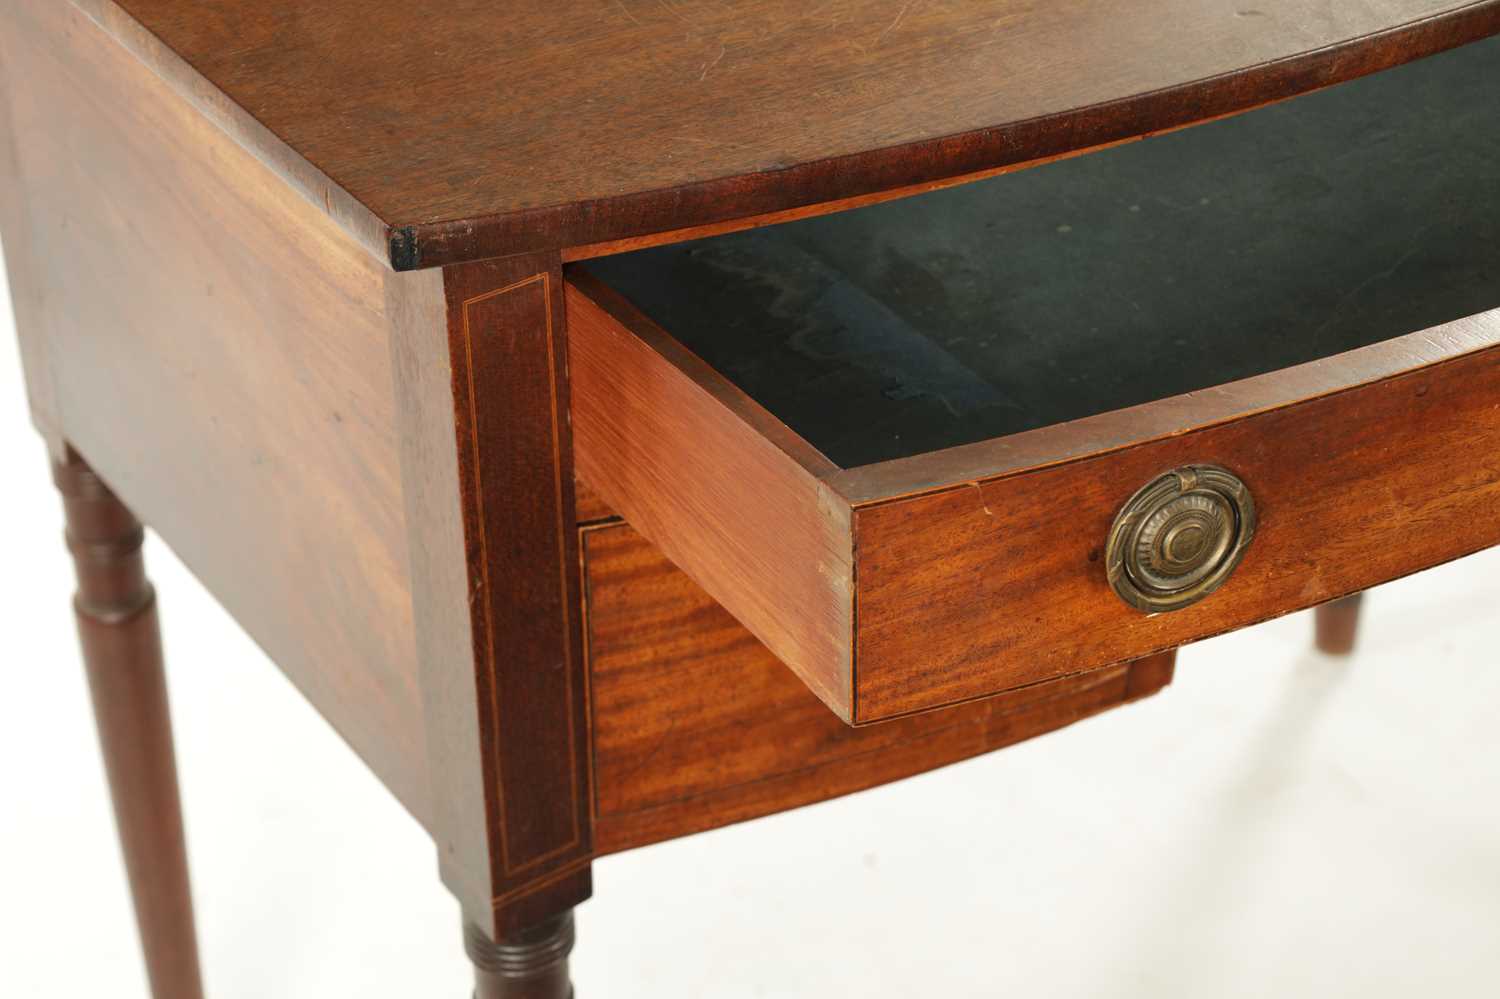 A REGENCY GILLOWS STYLE MAHOGANY BOW FRONTED SIDE TABLE - Image 5 of 5